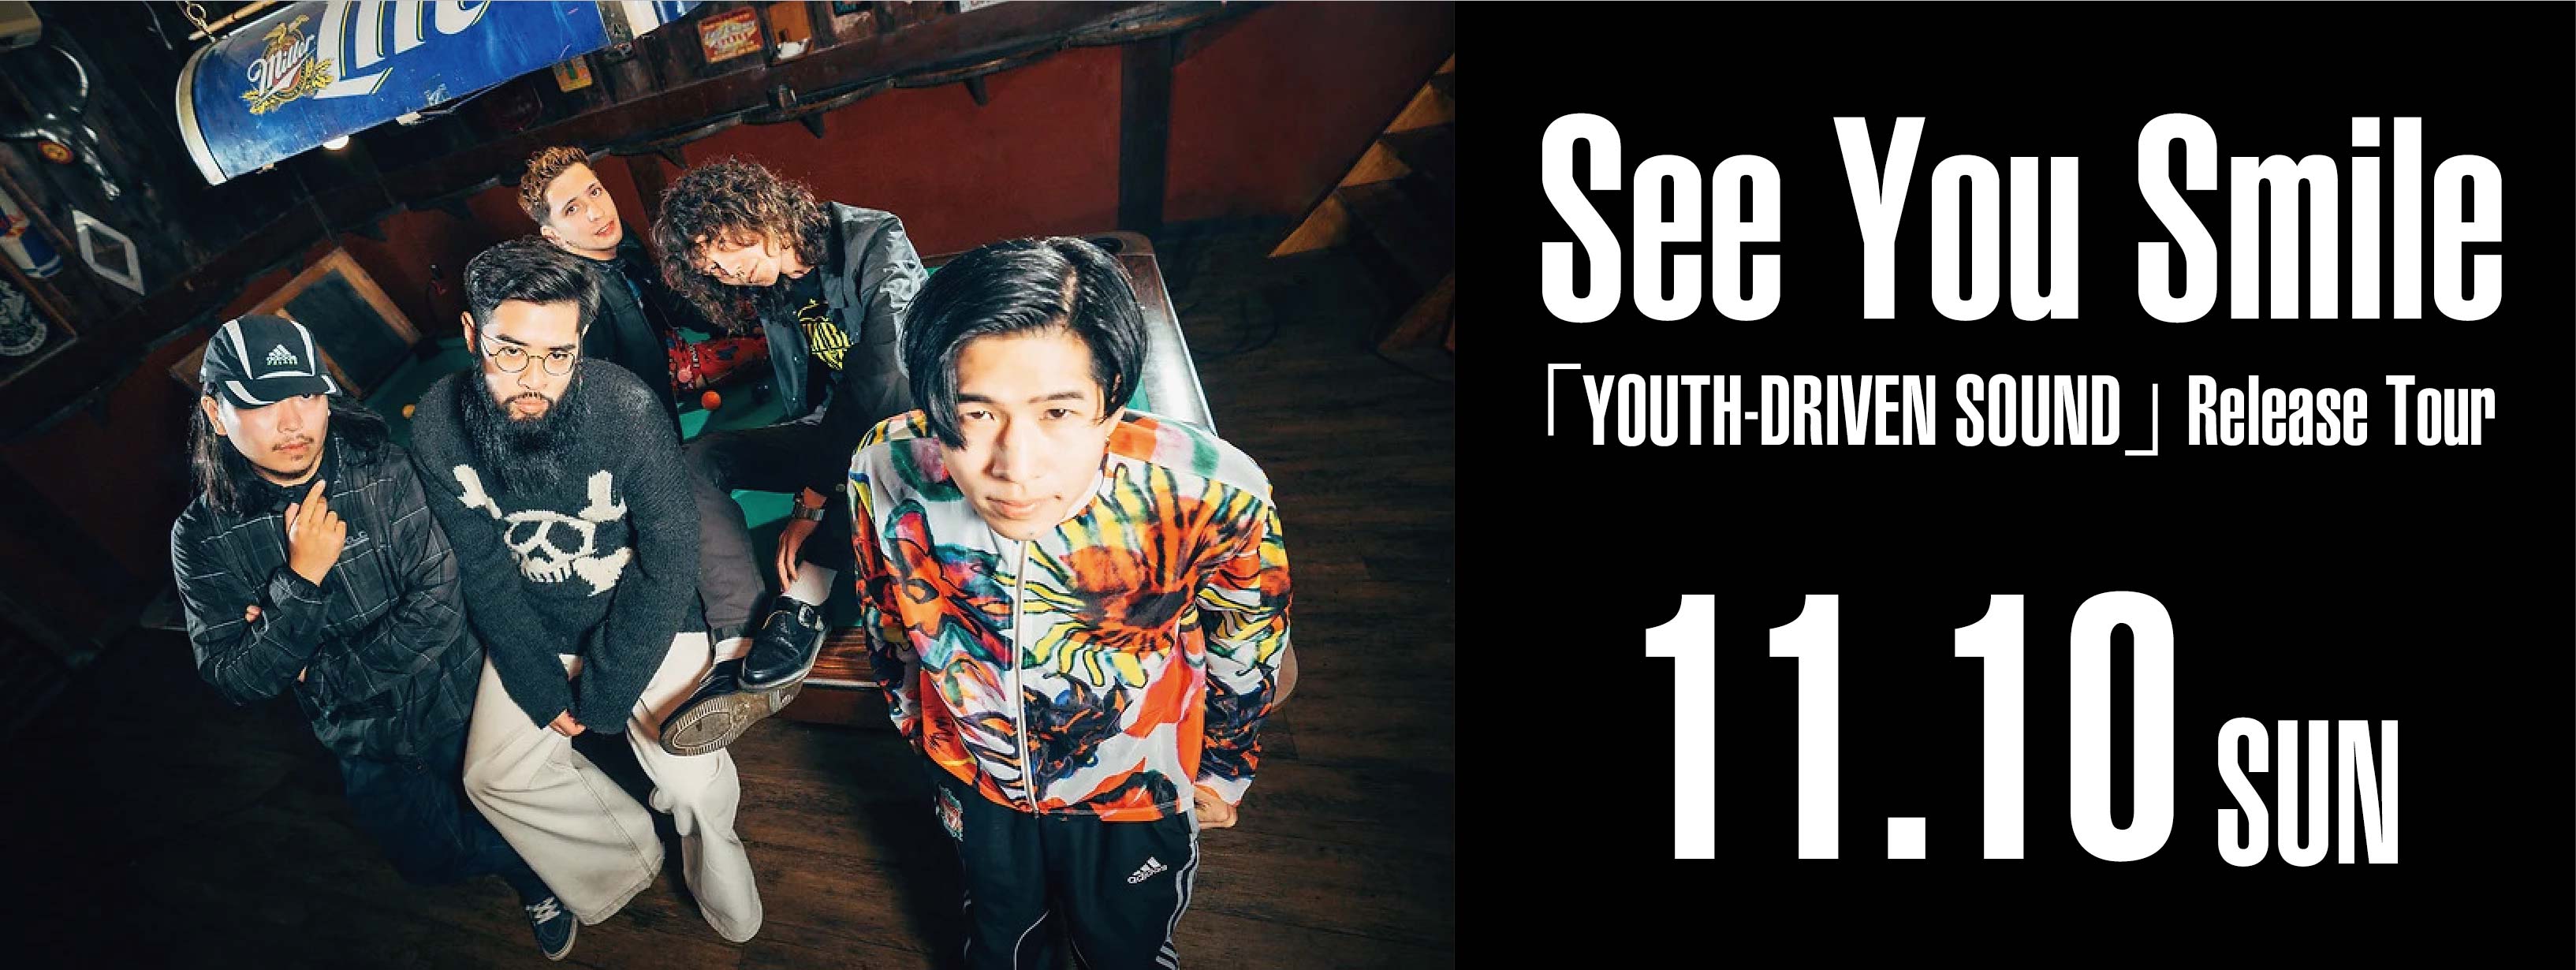 See You Smile 「YOUTH-DRIVEN SOUND」  Release Tour